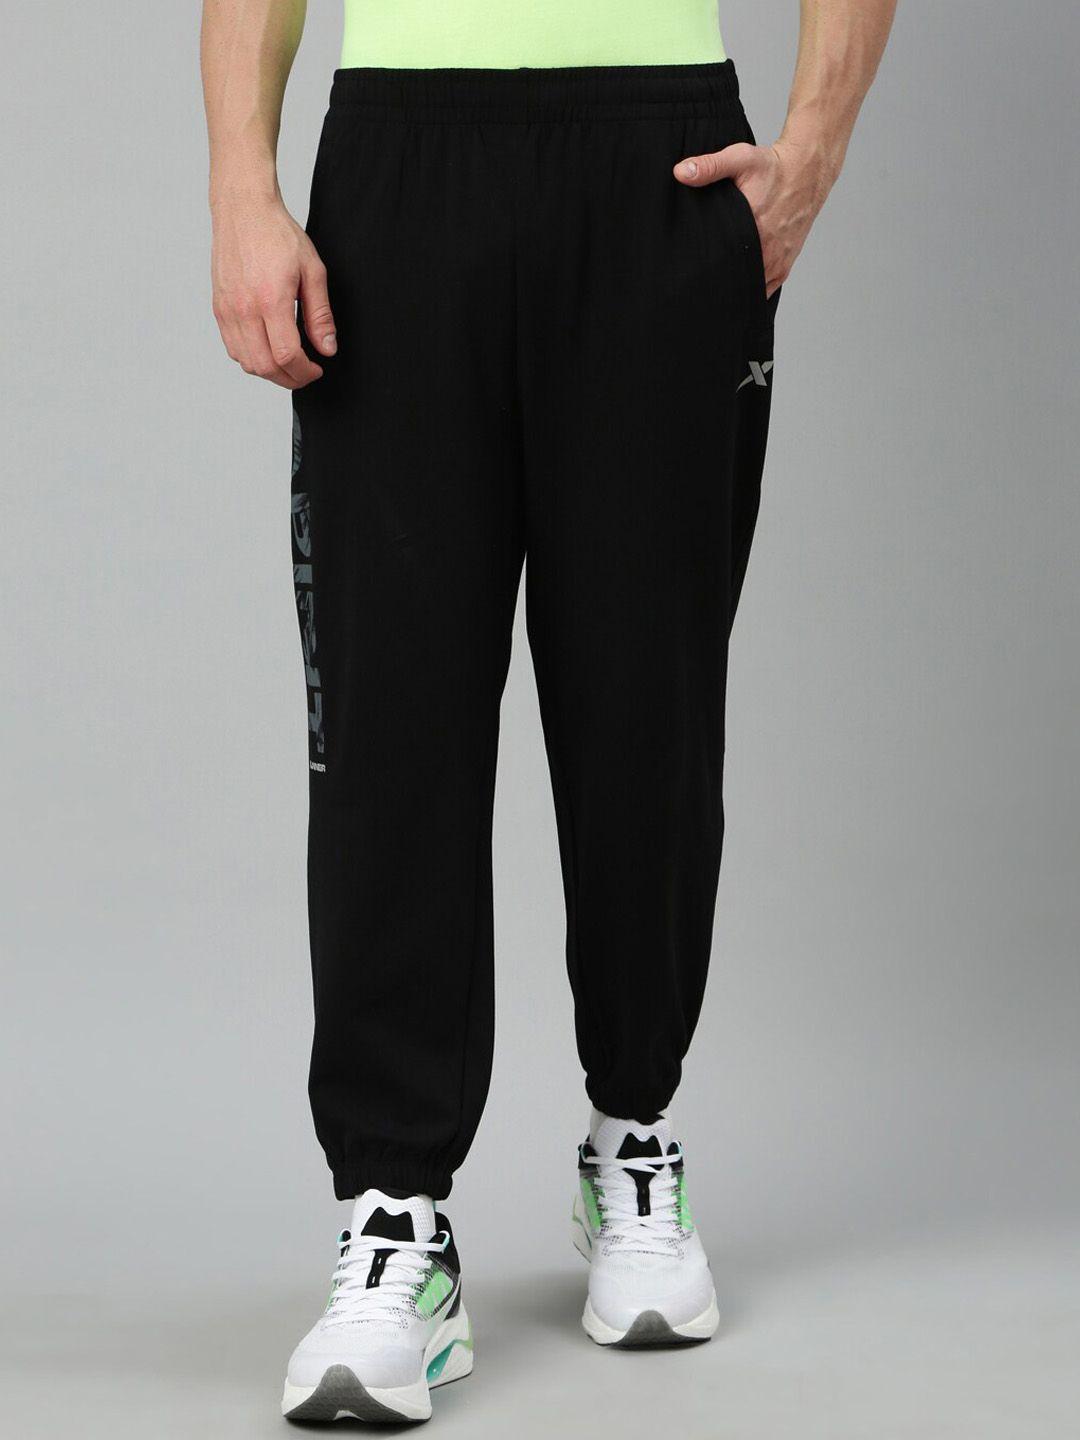 xtep-men-brand-logo-antimicrobial-athletic-elasticityprimary-joggers